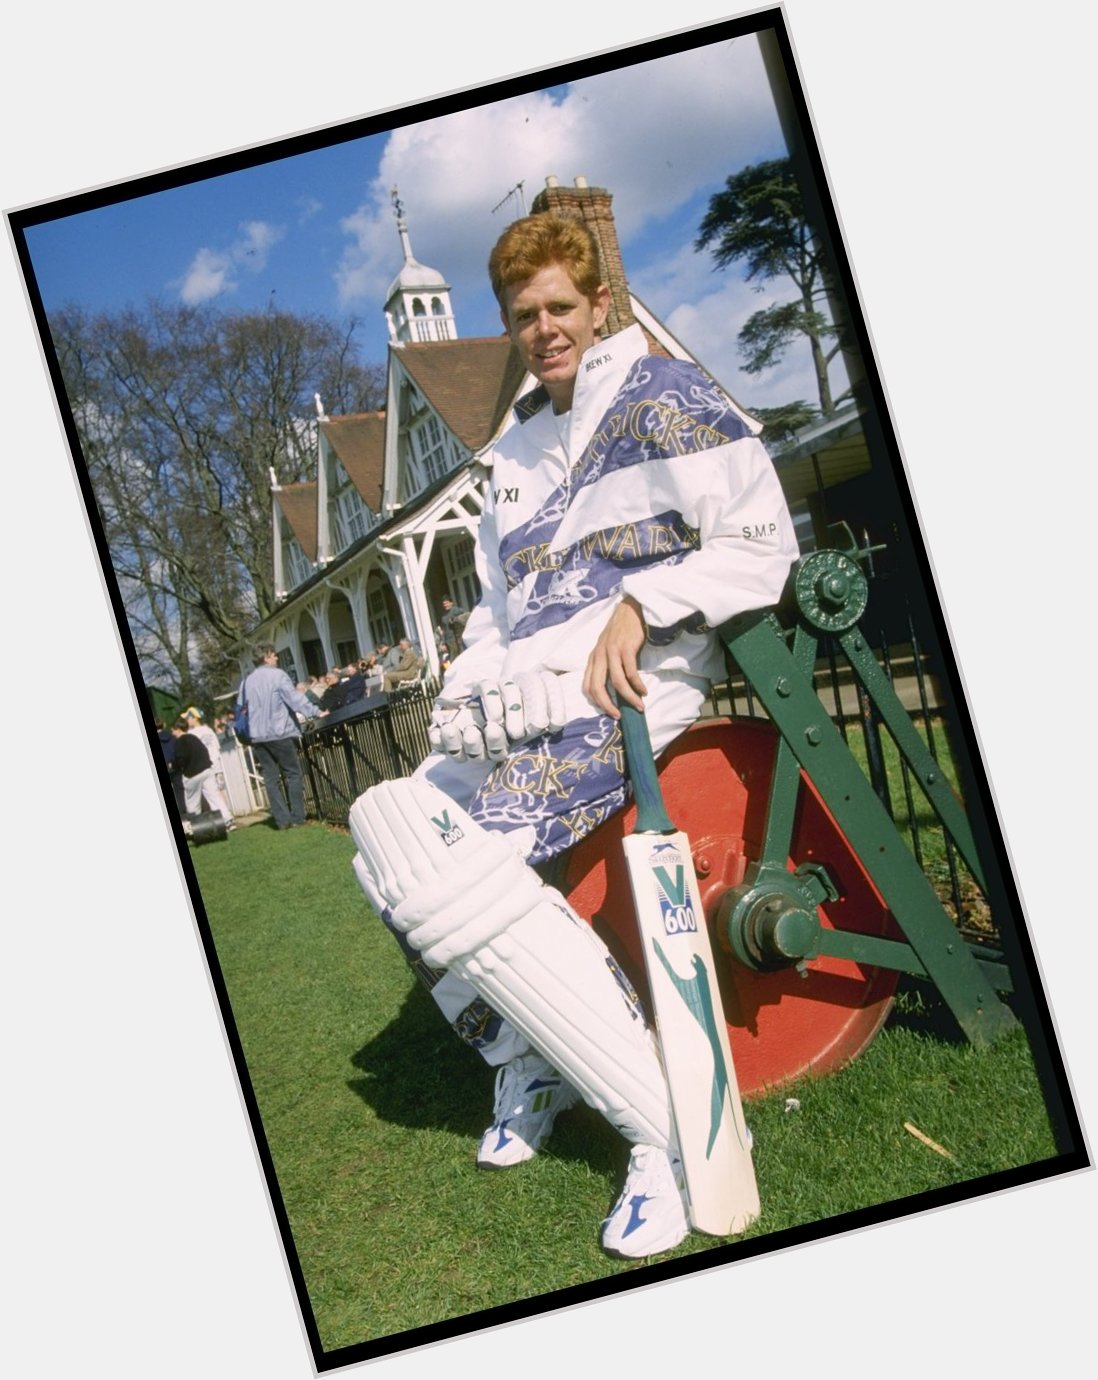   Happy birthday to Shaun Pollock, 47 today...

Here he is in some outstanding clobber 